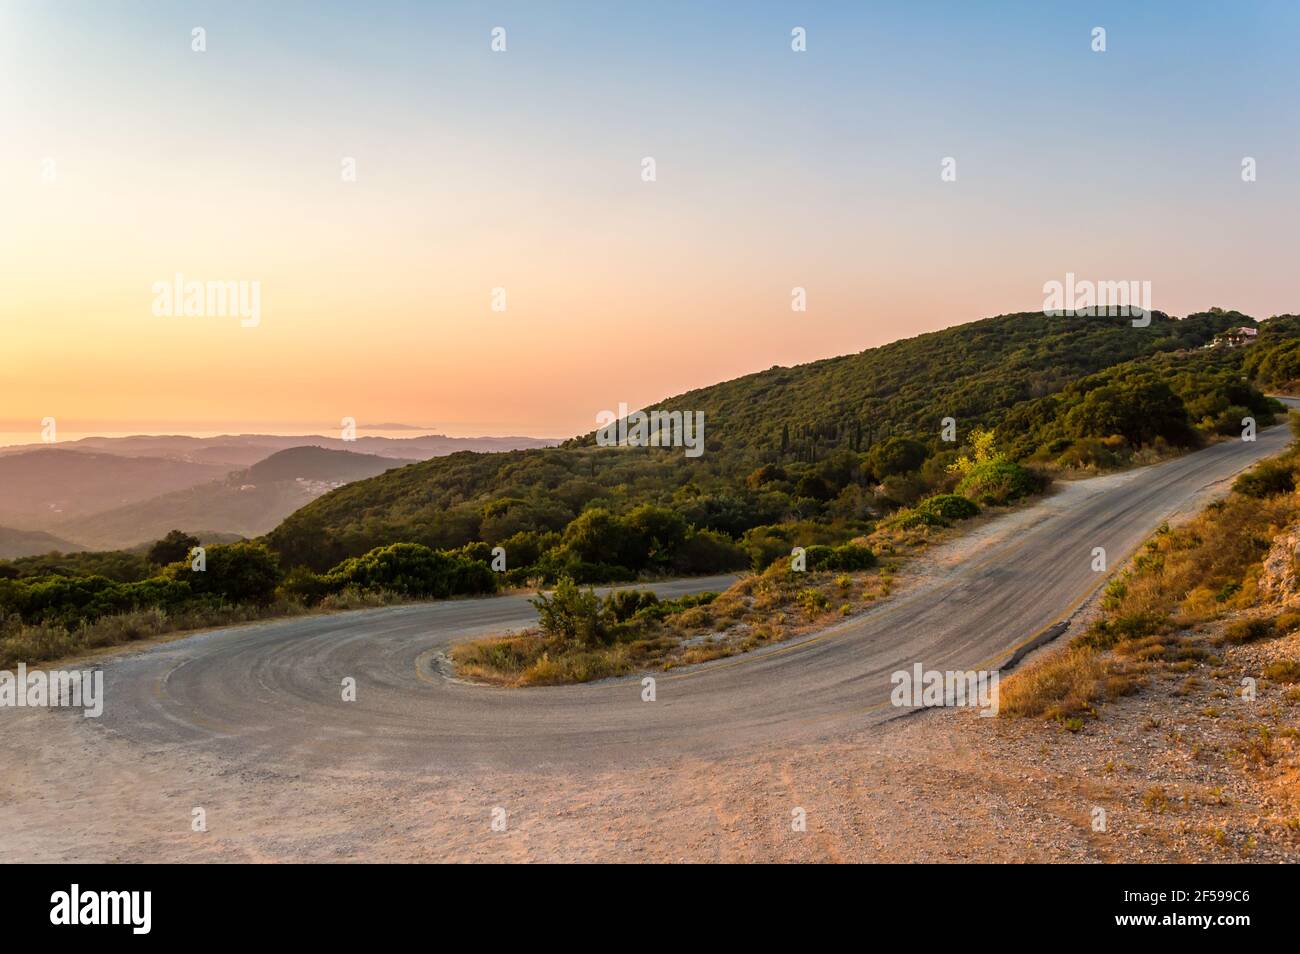 Winding mountain road curve on Corfu island in Greece at sunset. Beautiful landscape view of hills and mountains with lush vegetation over sea Stock Photo